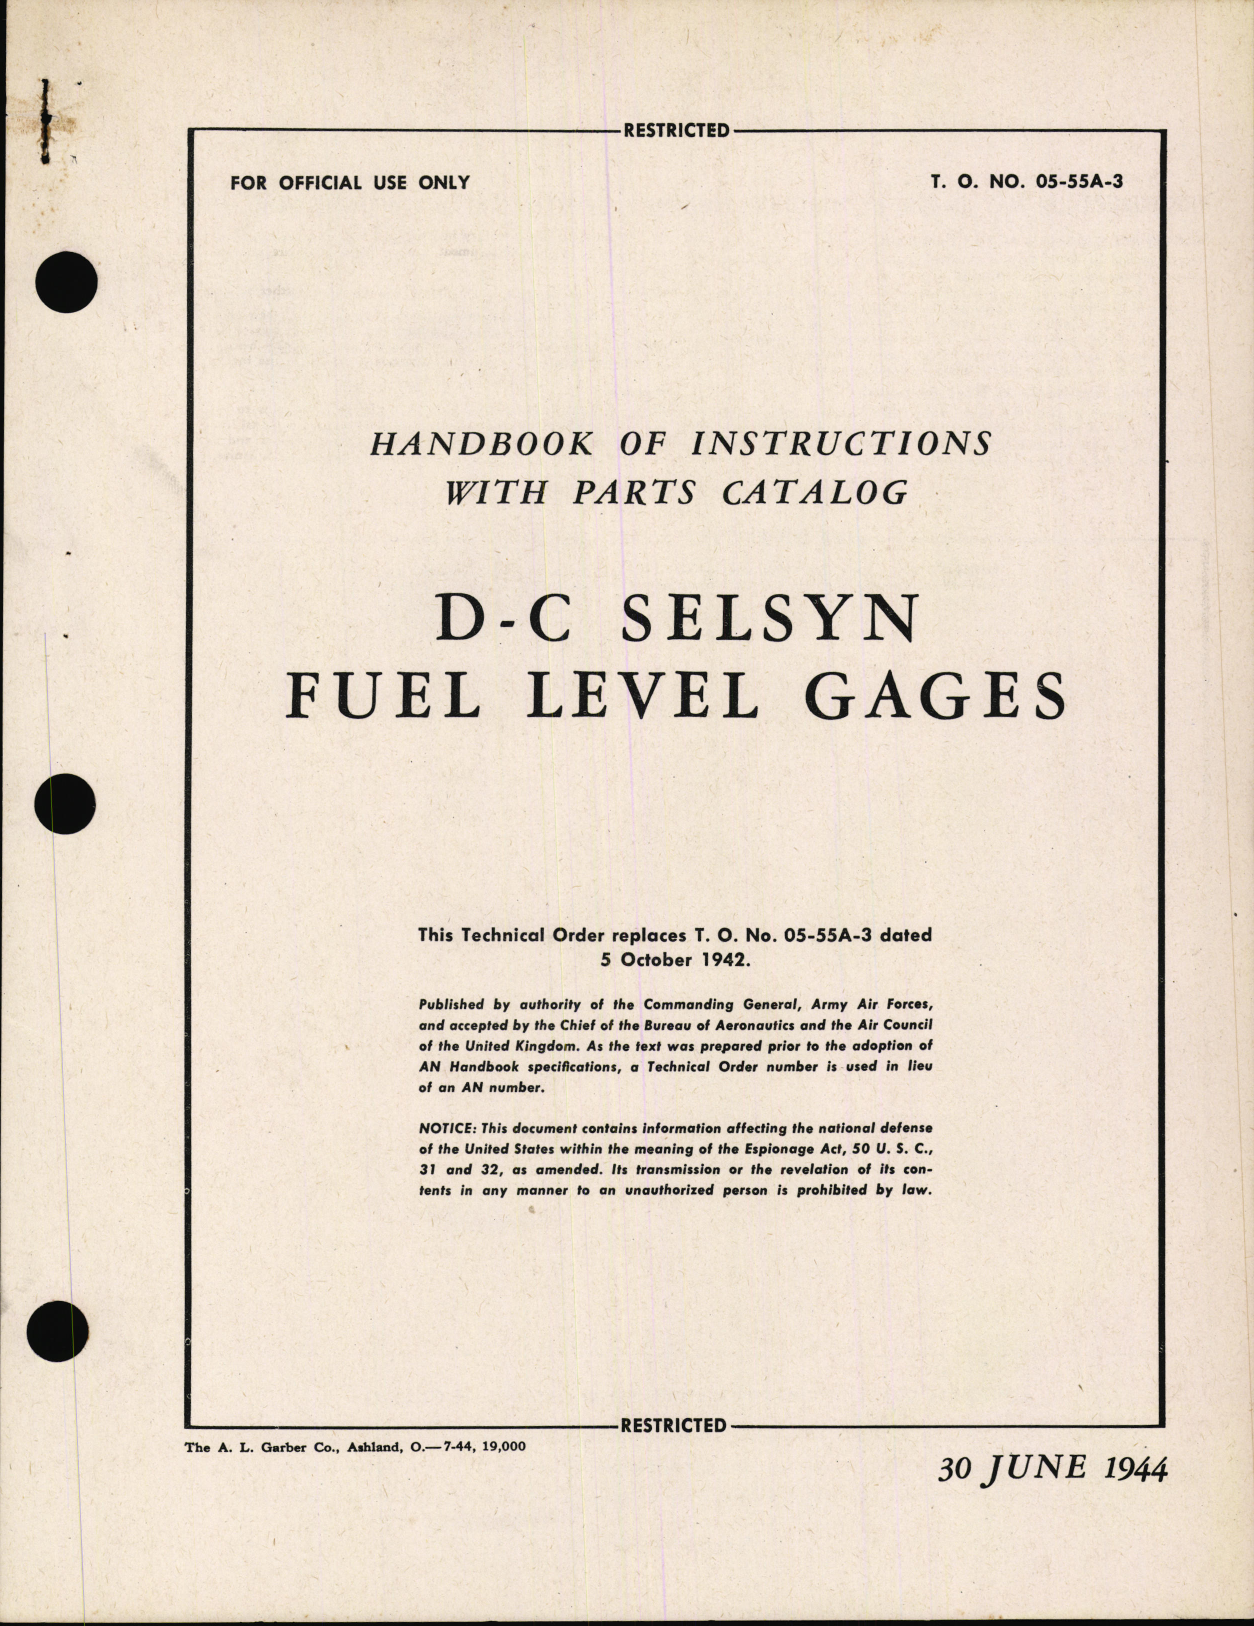 Sample page 1 from AirCorps Library document: Handbook of Instructions with Parts Catalog for D-C Selsyn Fuel Level Gages